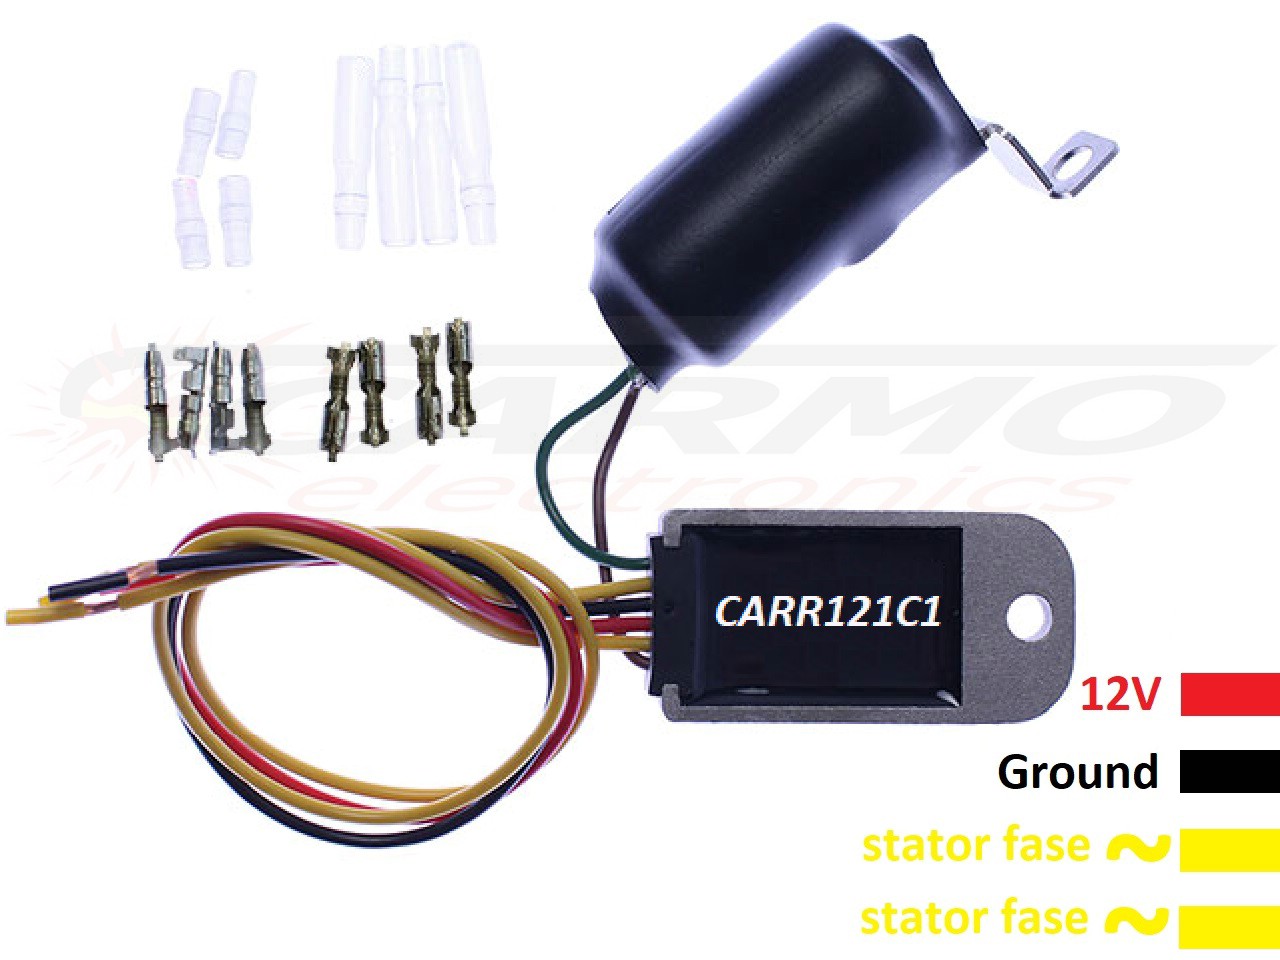 CARR121C1 - 2 fase voltage regulator with capacitor, no batterie needed - for LED lighting - Click Image to Close